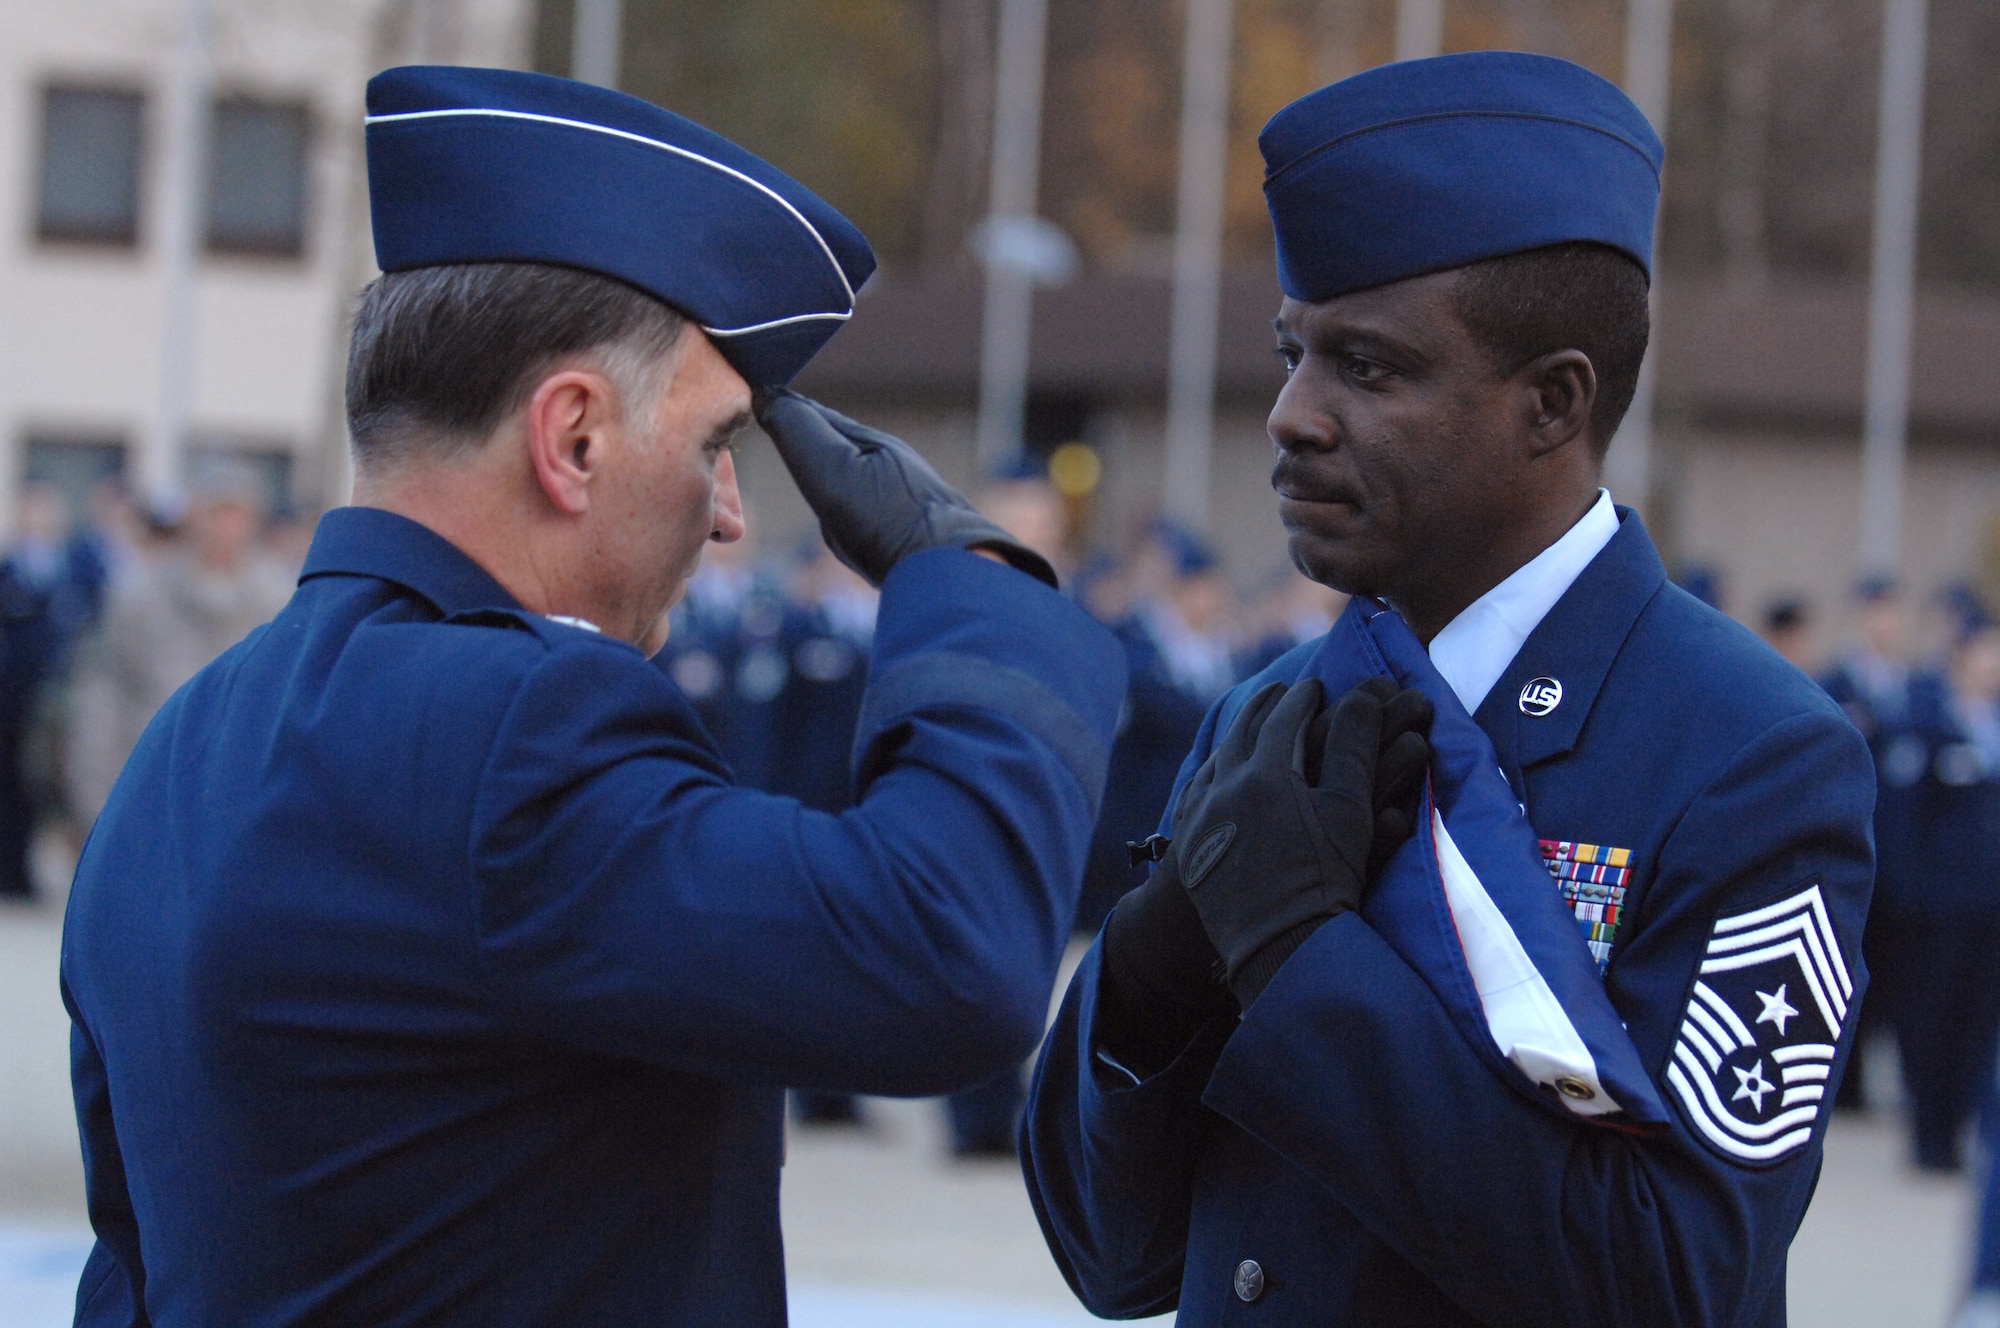 U.S. Air Forces in Europe Commander Gen William T. Hobbins salutes the flag after presenting it to USAFE Command Chief Master Sergeant Gary G. Coleman during a retreat ceremony.  The retreat ceremony followed a retirement ceremony honoring Chief Coleman for 30 years of military service.  The chief’s retirement is effective May 1, 2008. (U.S. Air Force photo by Tech Sgt. Corey Clements)